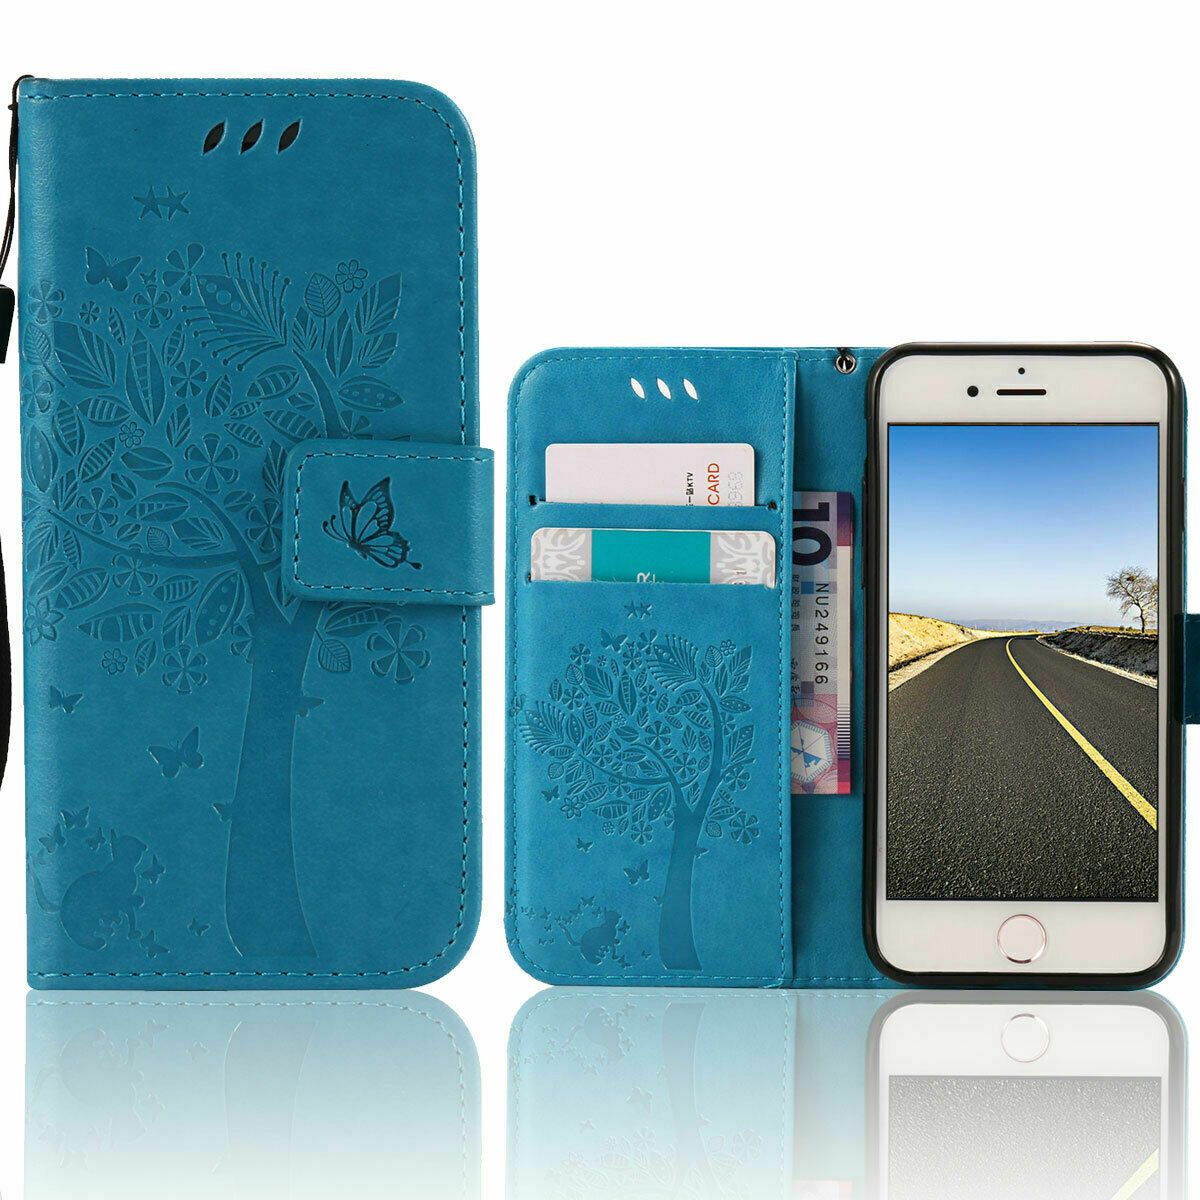 Magnetic Leather Wallet Case For iPhone 8 7 6s Plus X XS MAX XR Flip Cover Stand stekim-92 Blue iPhone6/6S 